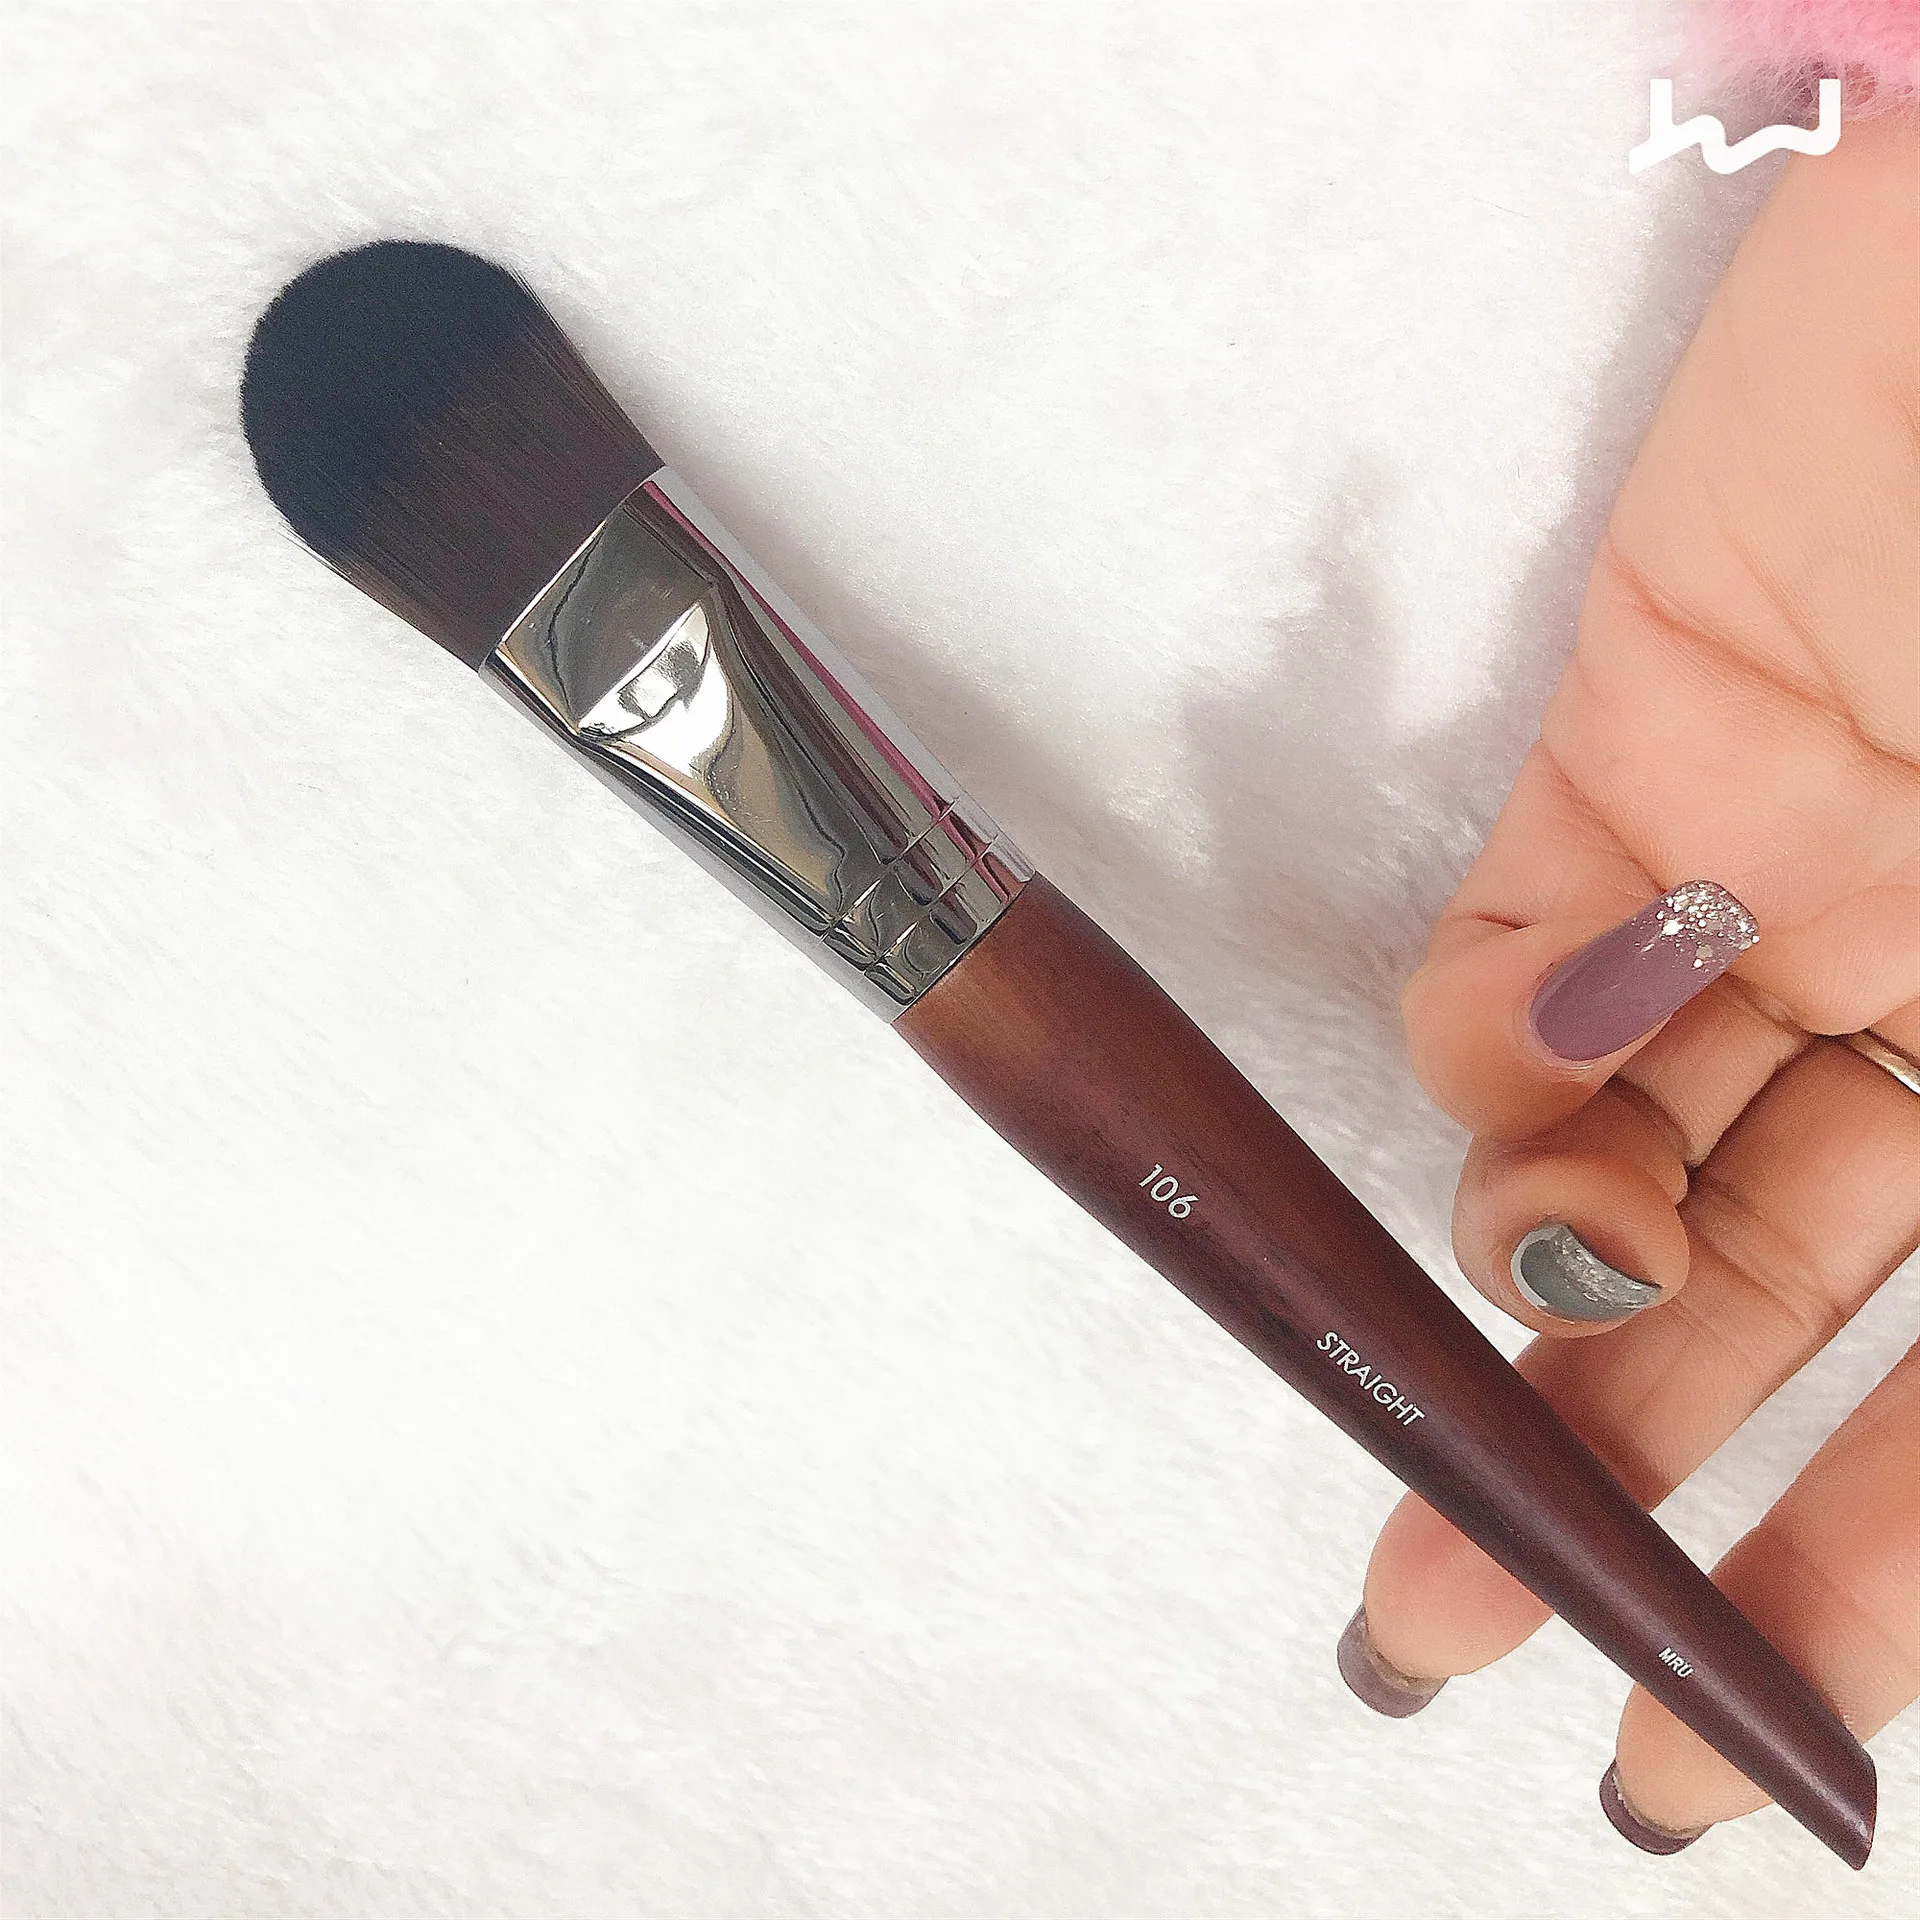 Shopkeeper Recommended!Large Soft Powder Big Blush Flame Brush Foundation Makeup Brush wood handle Cosmetic Tool Drop Shipping